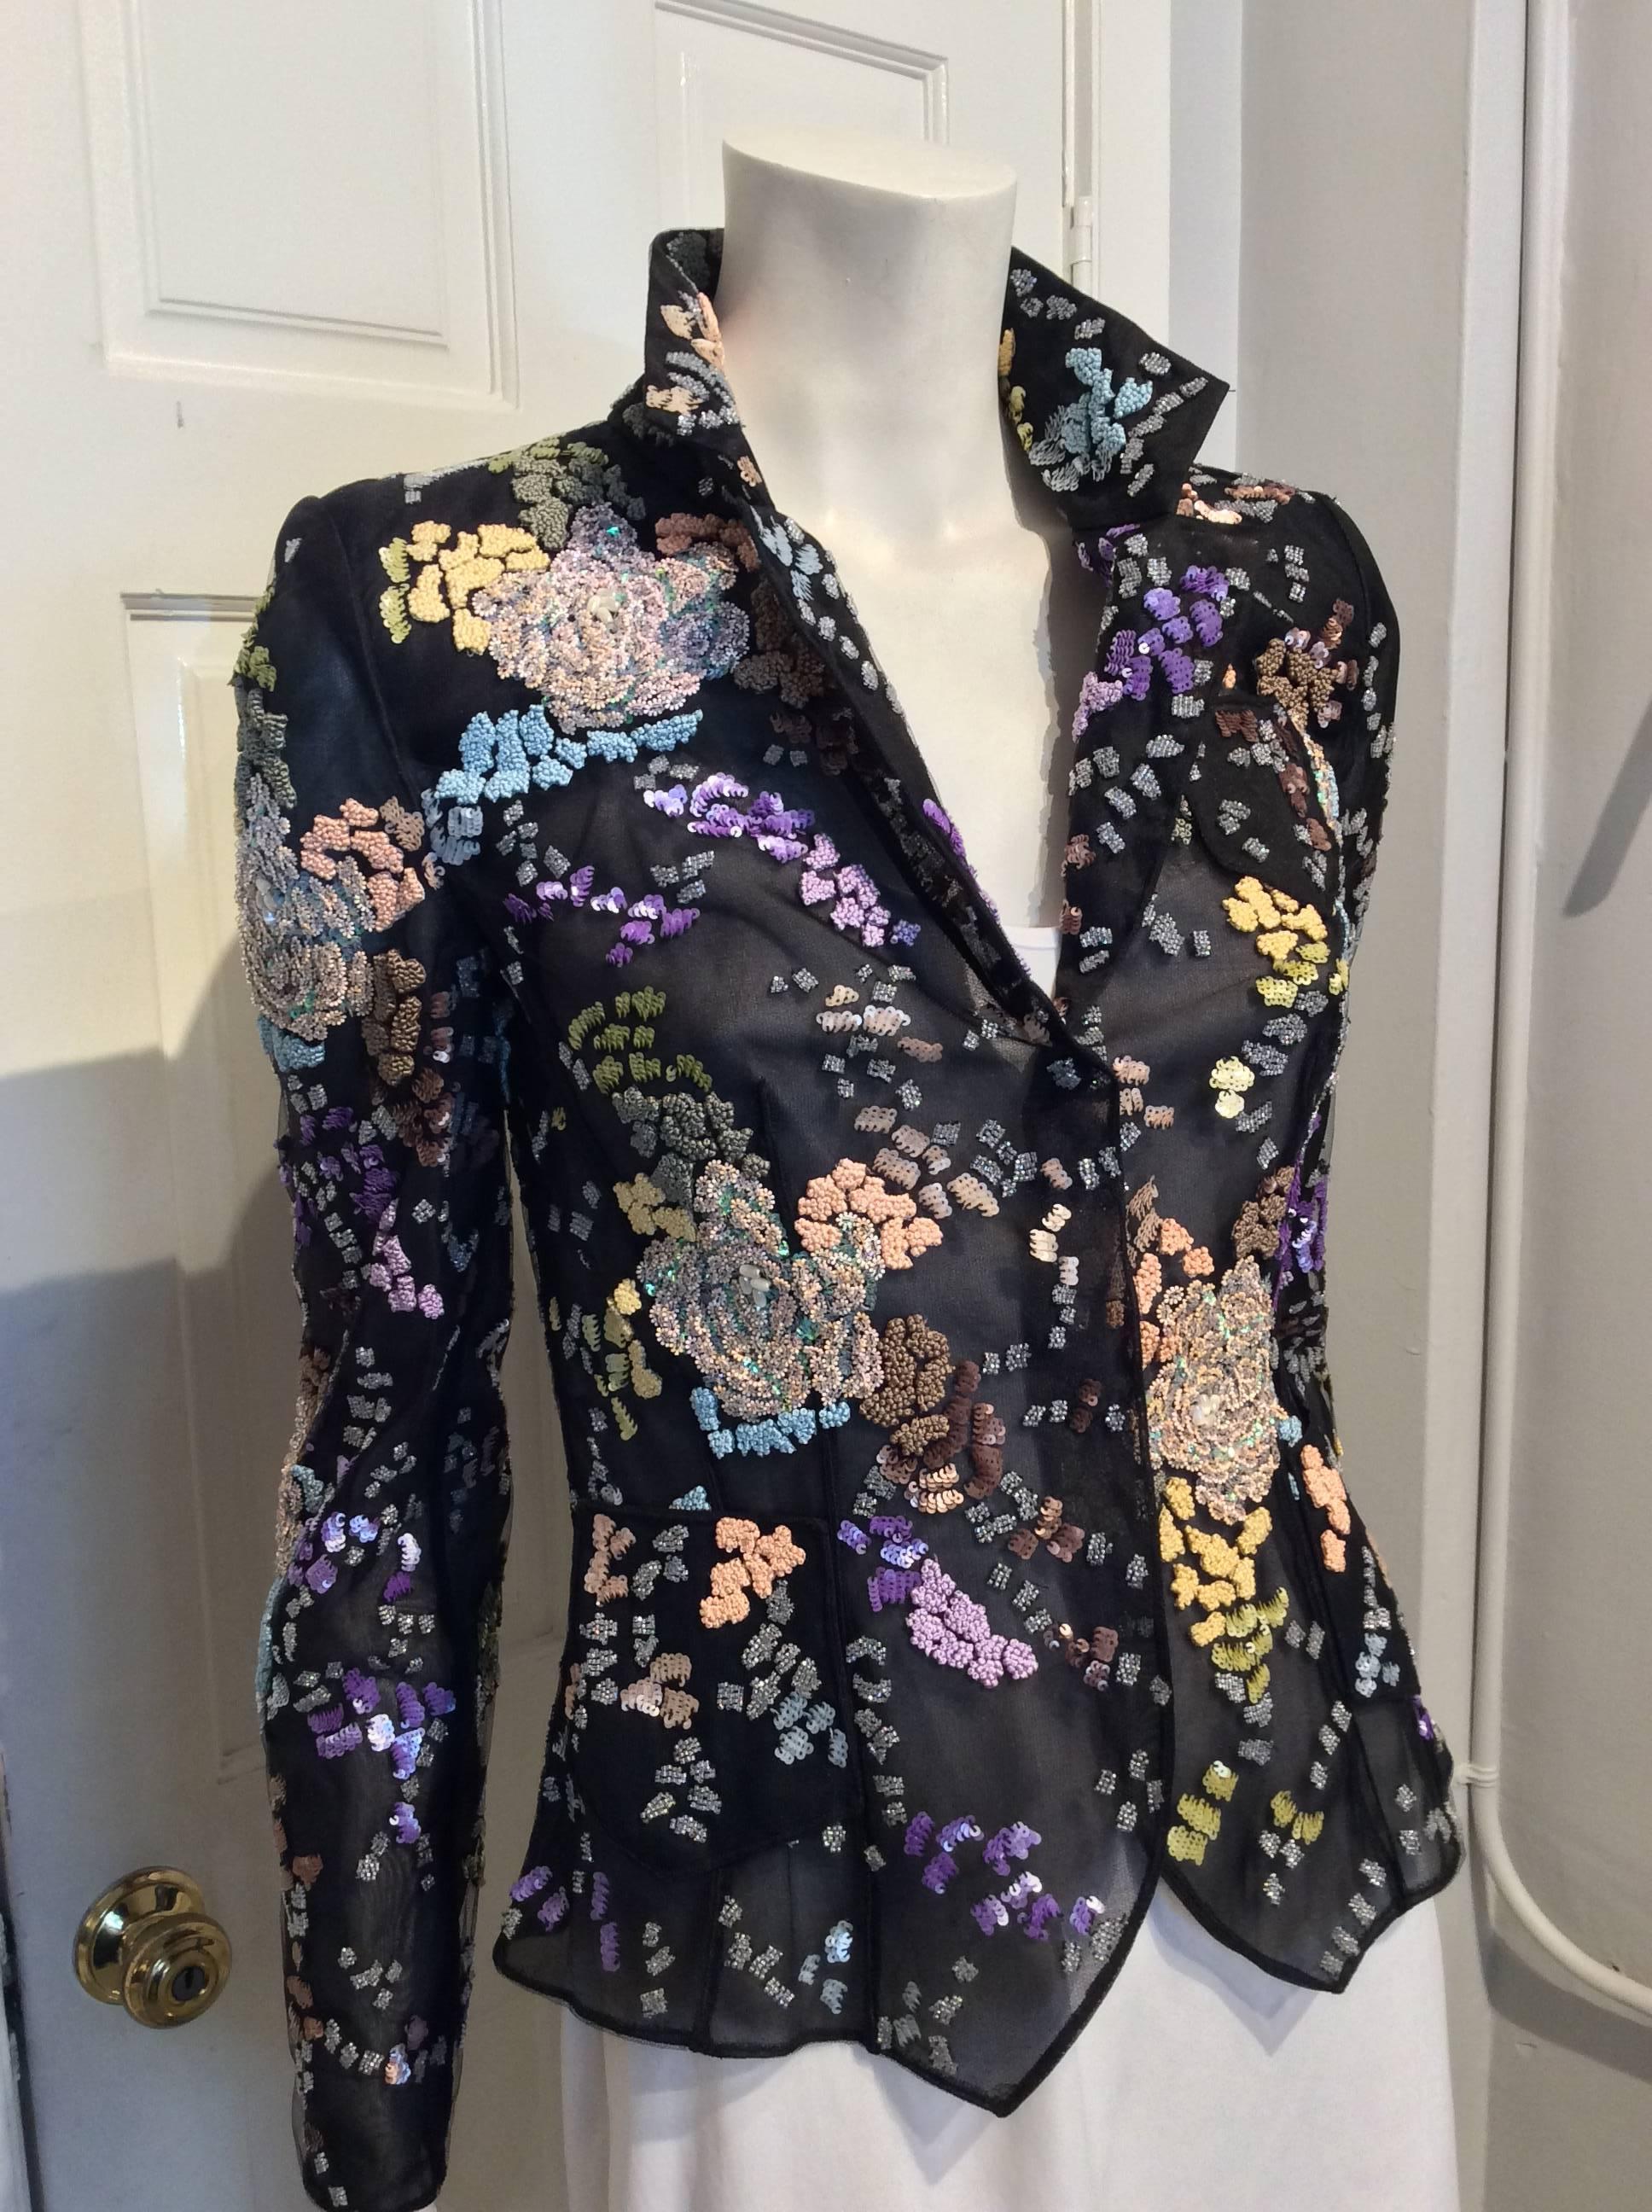 Giorgio Armani black mesh fitted blazer with multi-colored beads and sequins in a floral pattern. Beads and sequins are purple, blue, brown, yellow and pink; Embroidered rosettes; two small hip pockets, one small breast pocket; Closes in front with